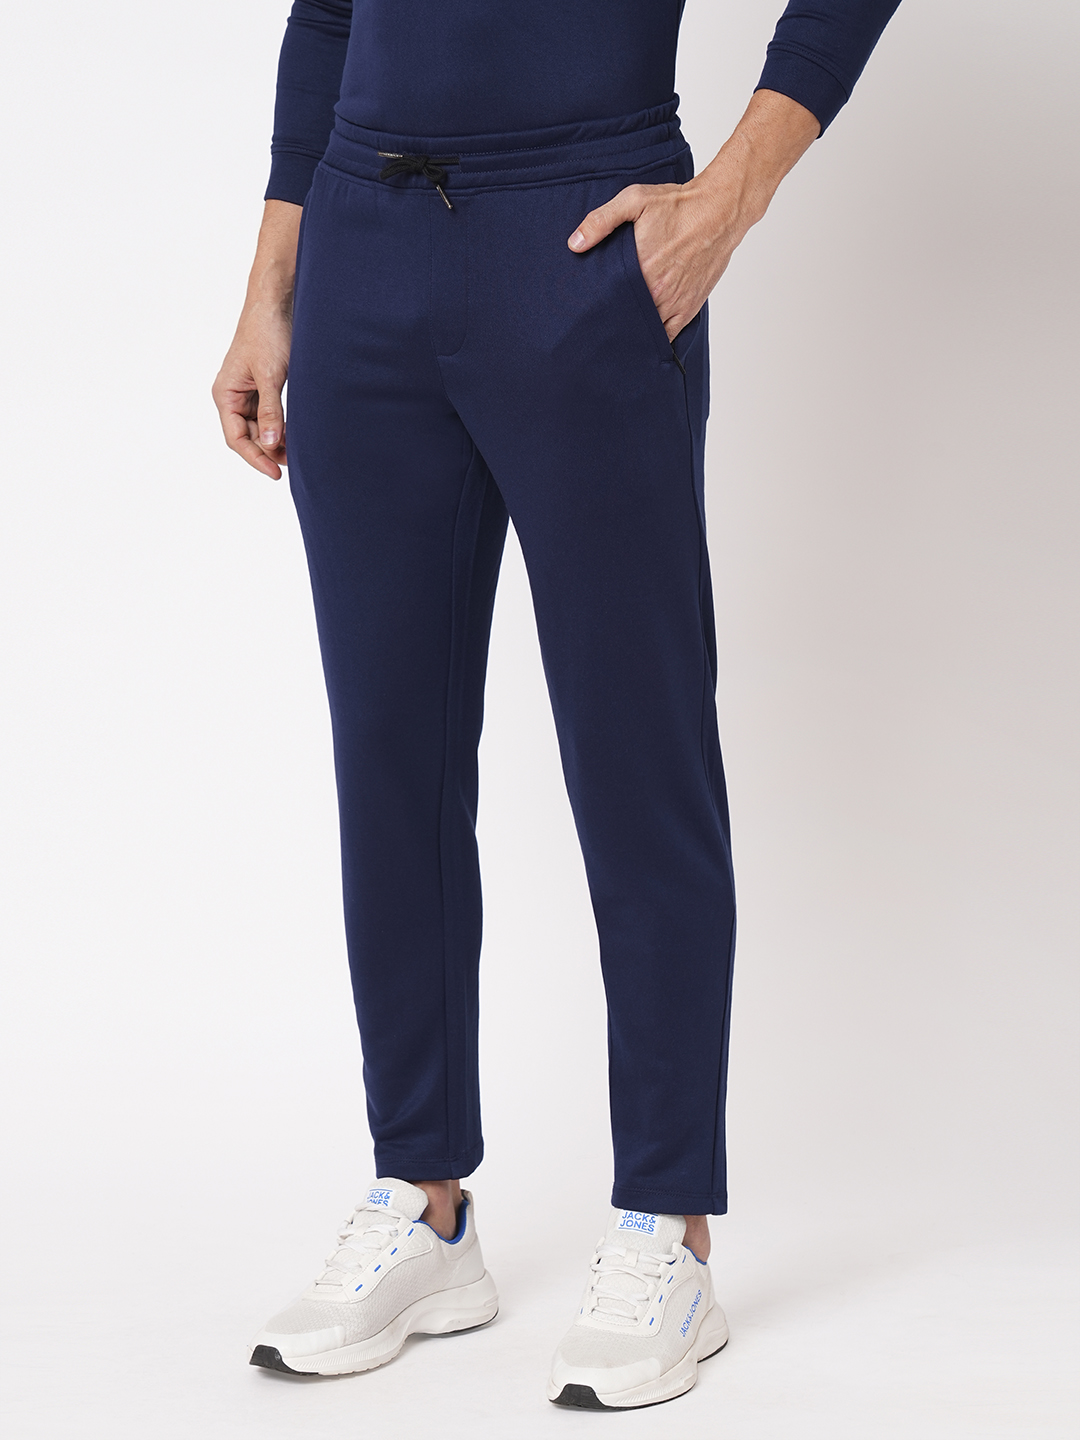 NAVY BLUE ATHLEISURE TRACK PANT (COMFORT FIT)